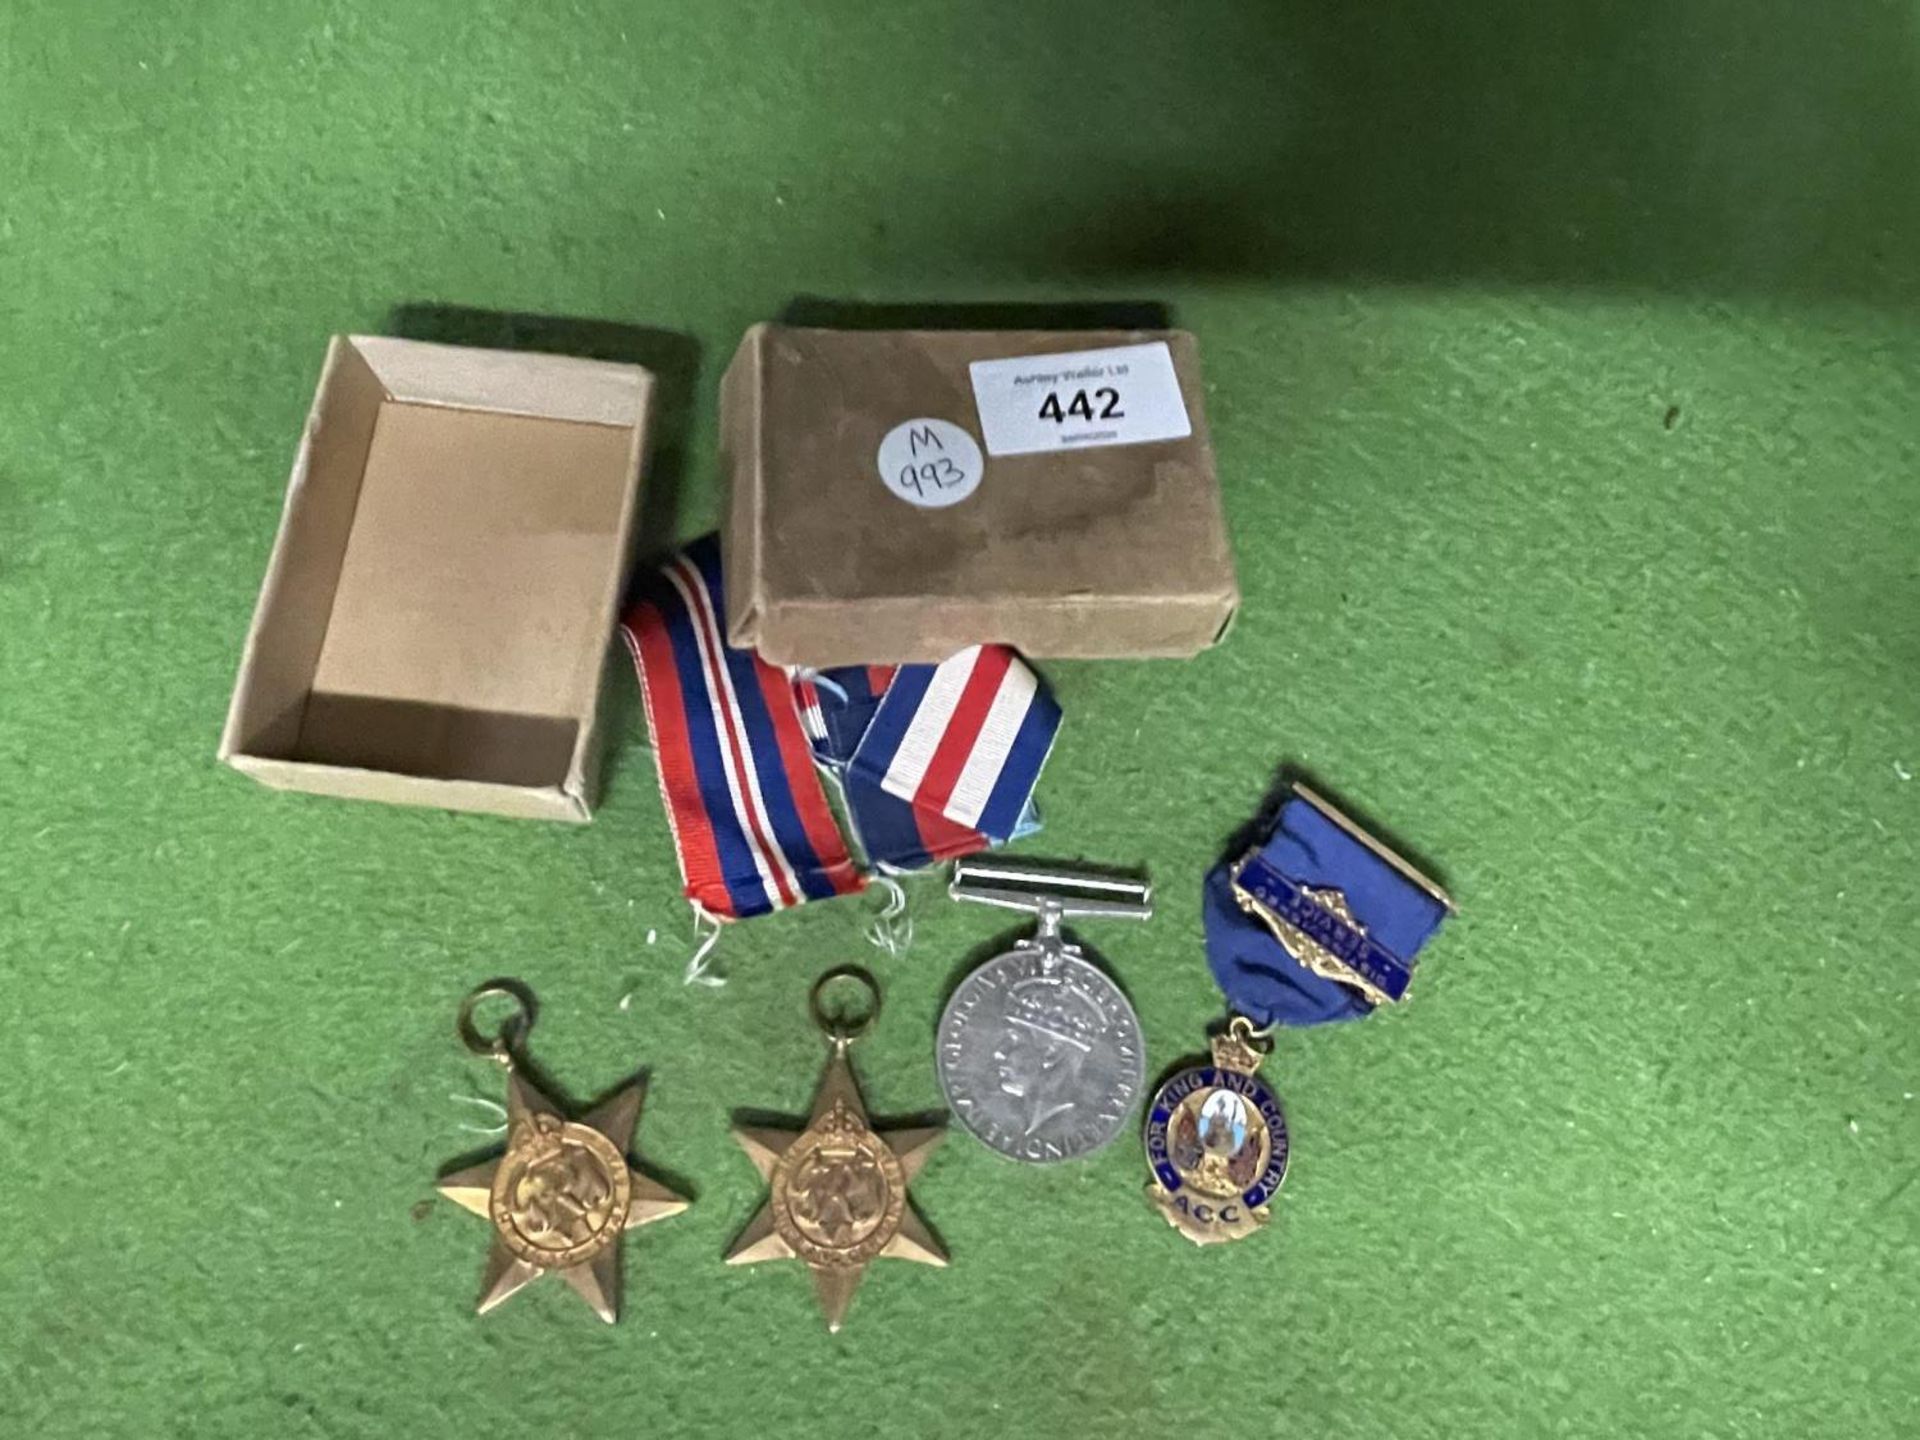 WORLD WAR II MEDALS, 1939-45 STAR, FRANCE AND GERMANY STAR 1939-45 MEDAL ETC.